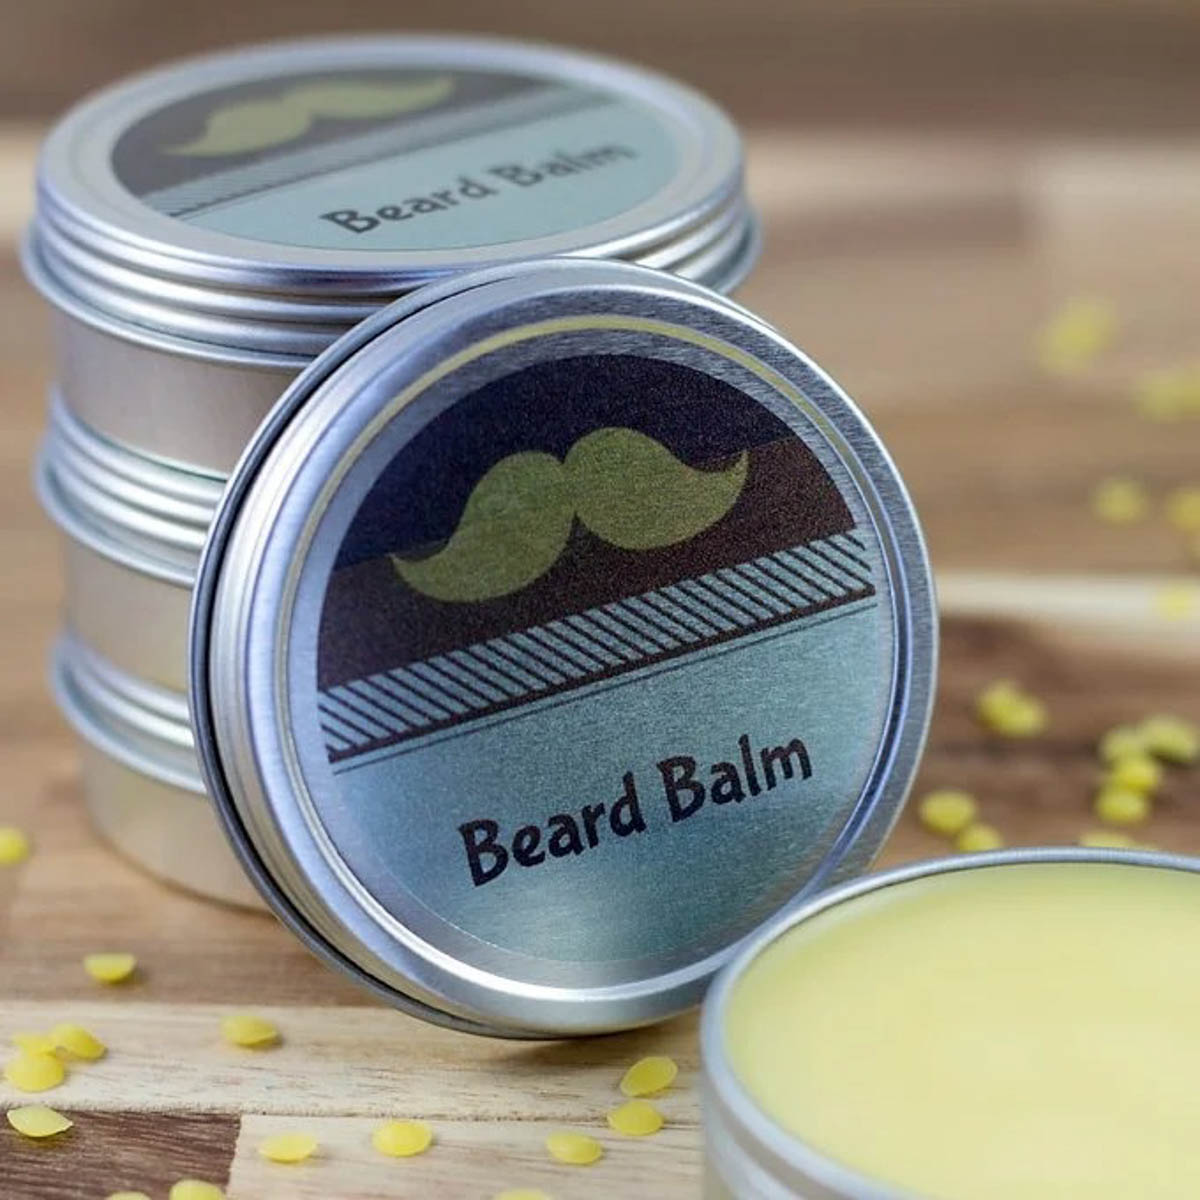 Gifts for men can of beard balm